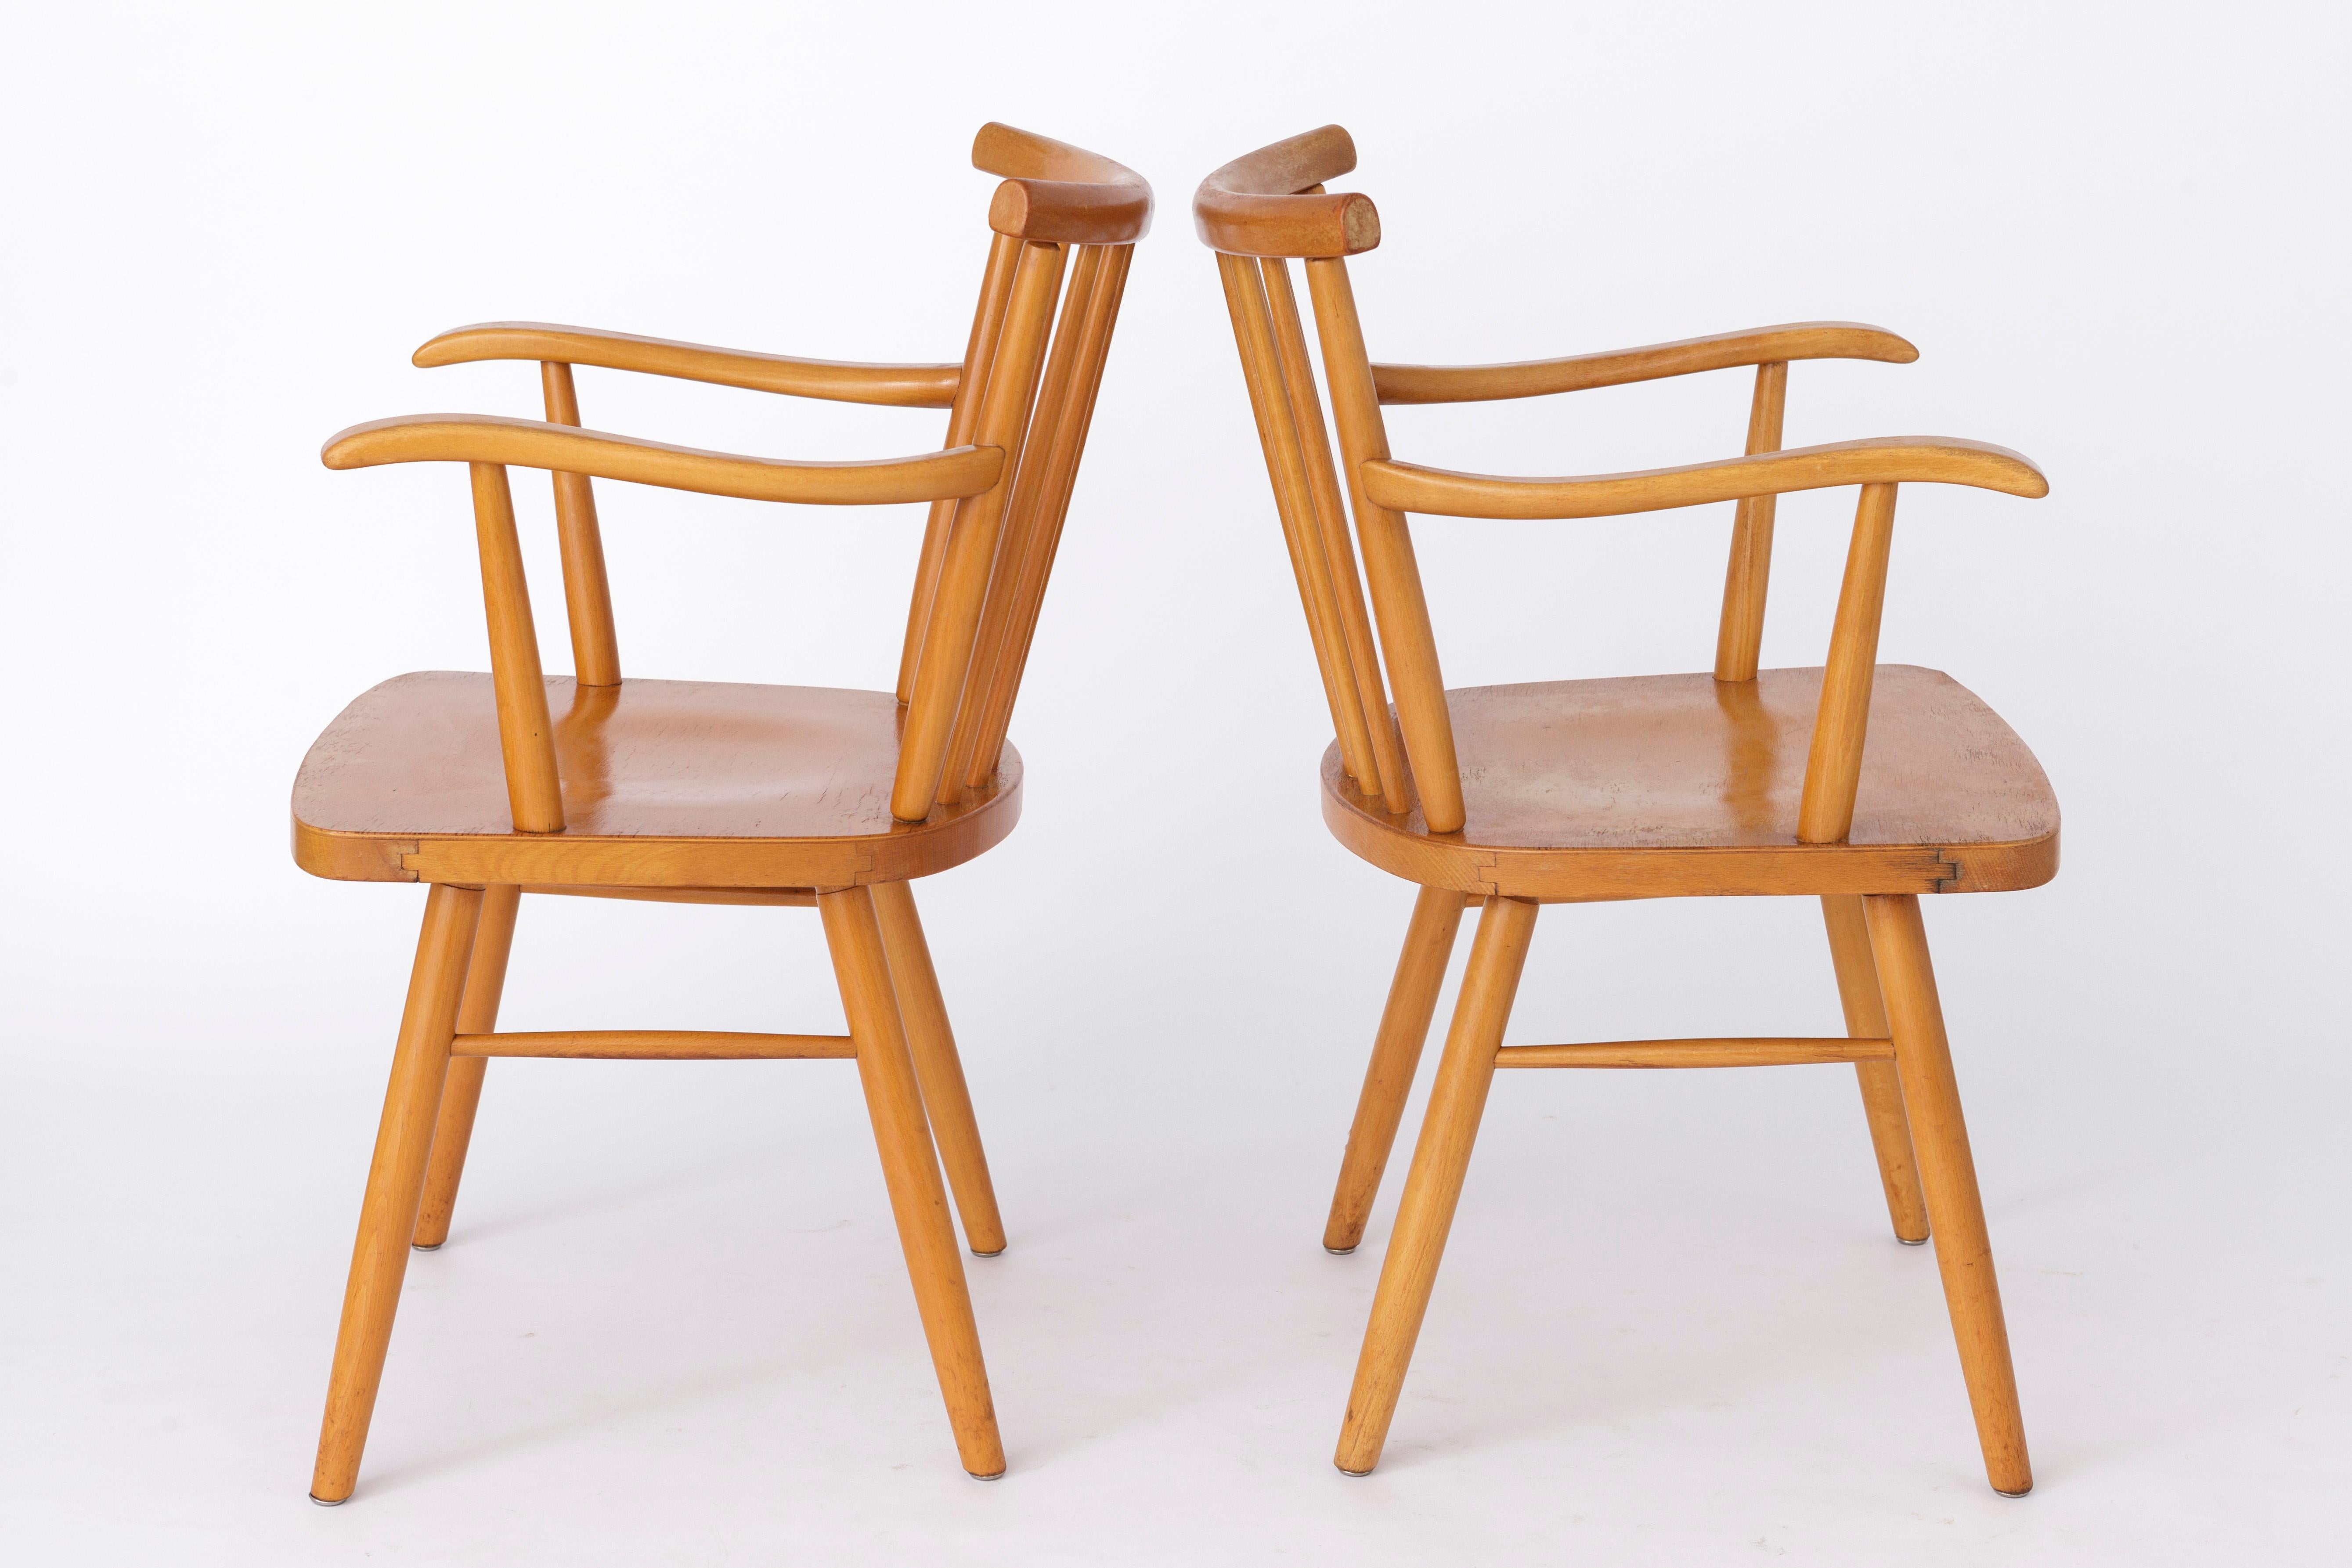 Polished Pair Lübke Chairs 1950s Vintage Germany For Sale